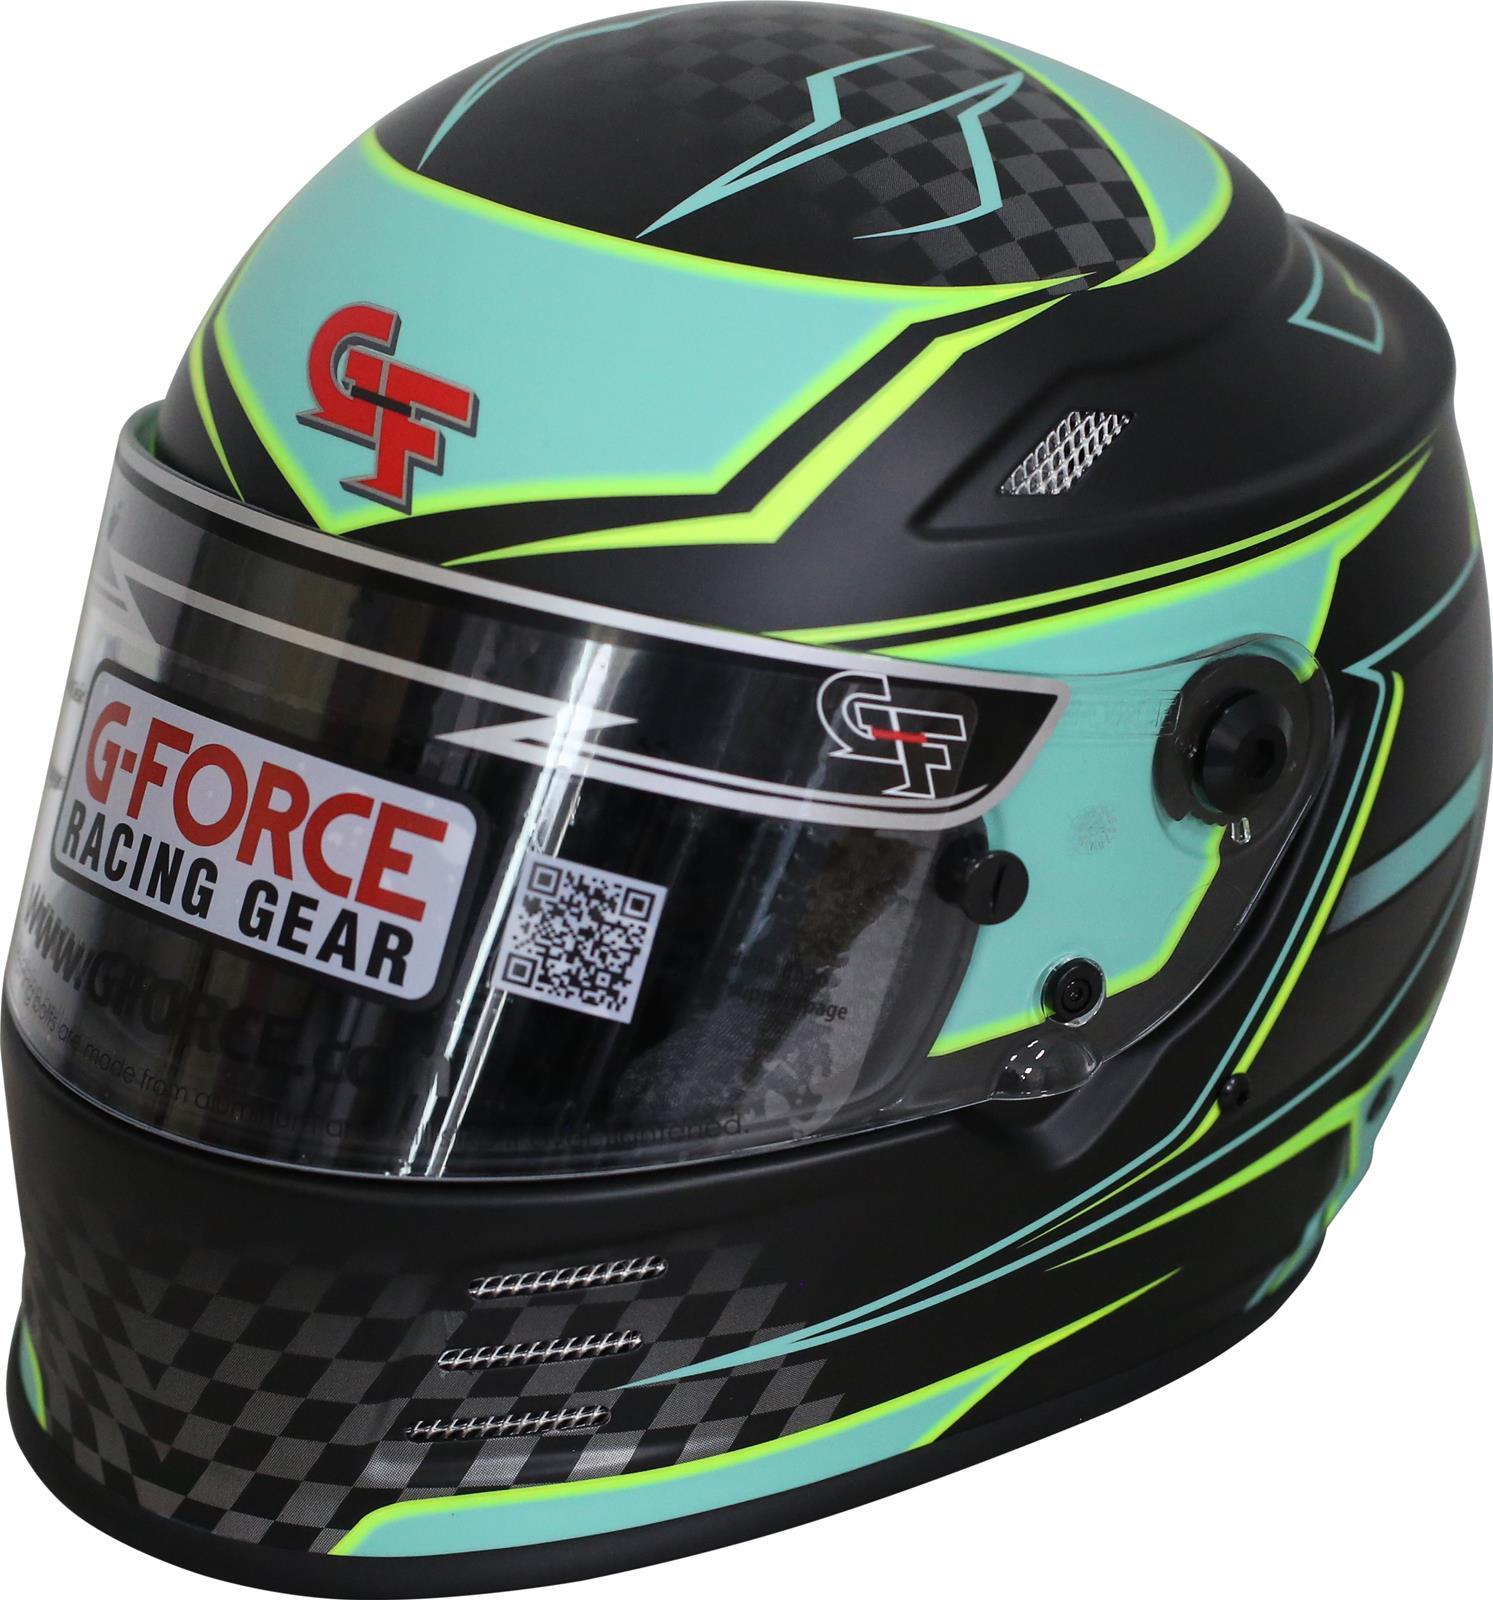 G-Force HELMET REVO GRAPHICS XLG TEAL SA2020 Helmets and Accessories Helmets main image